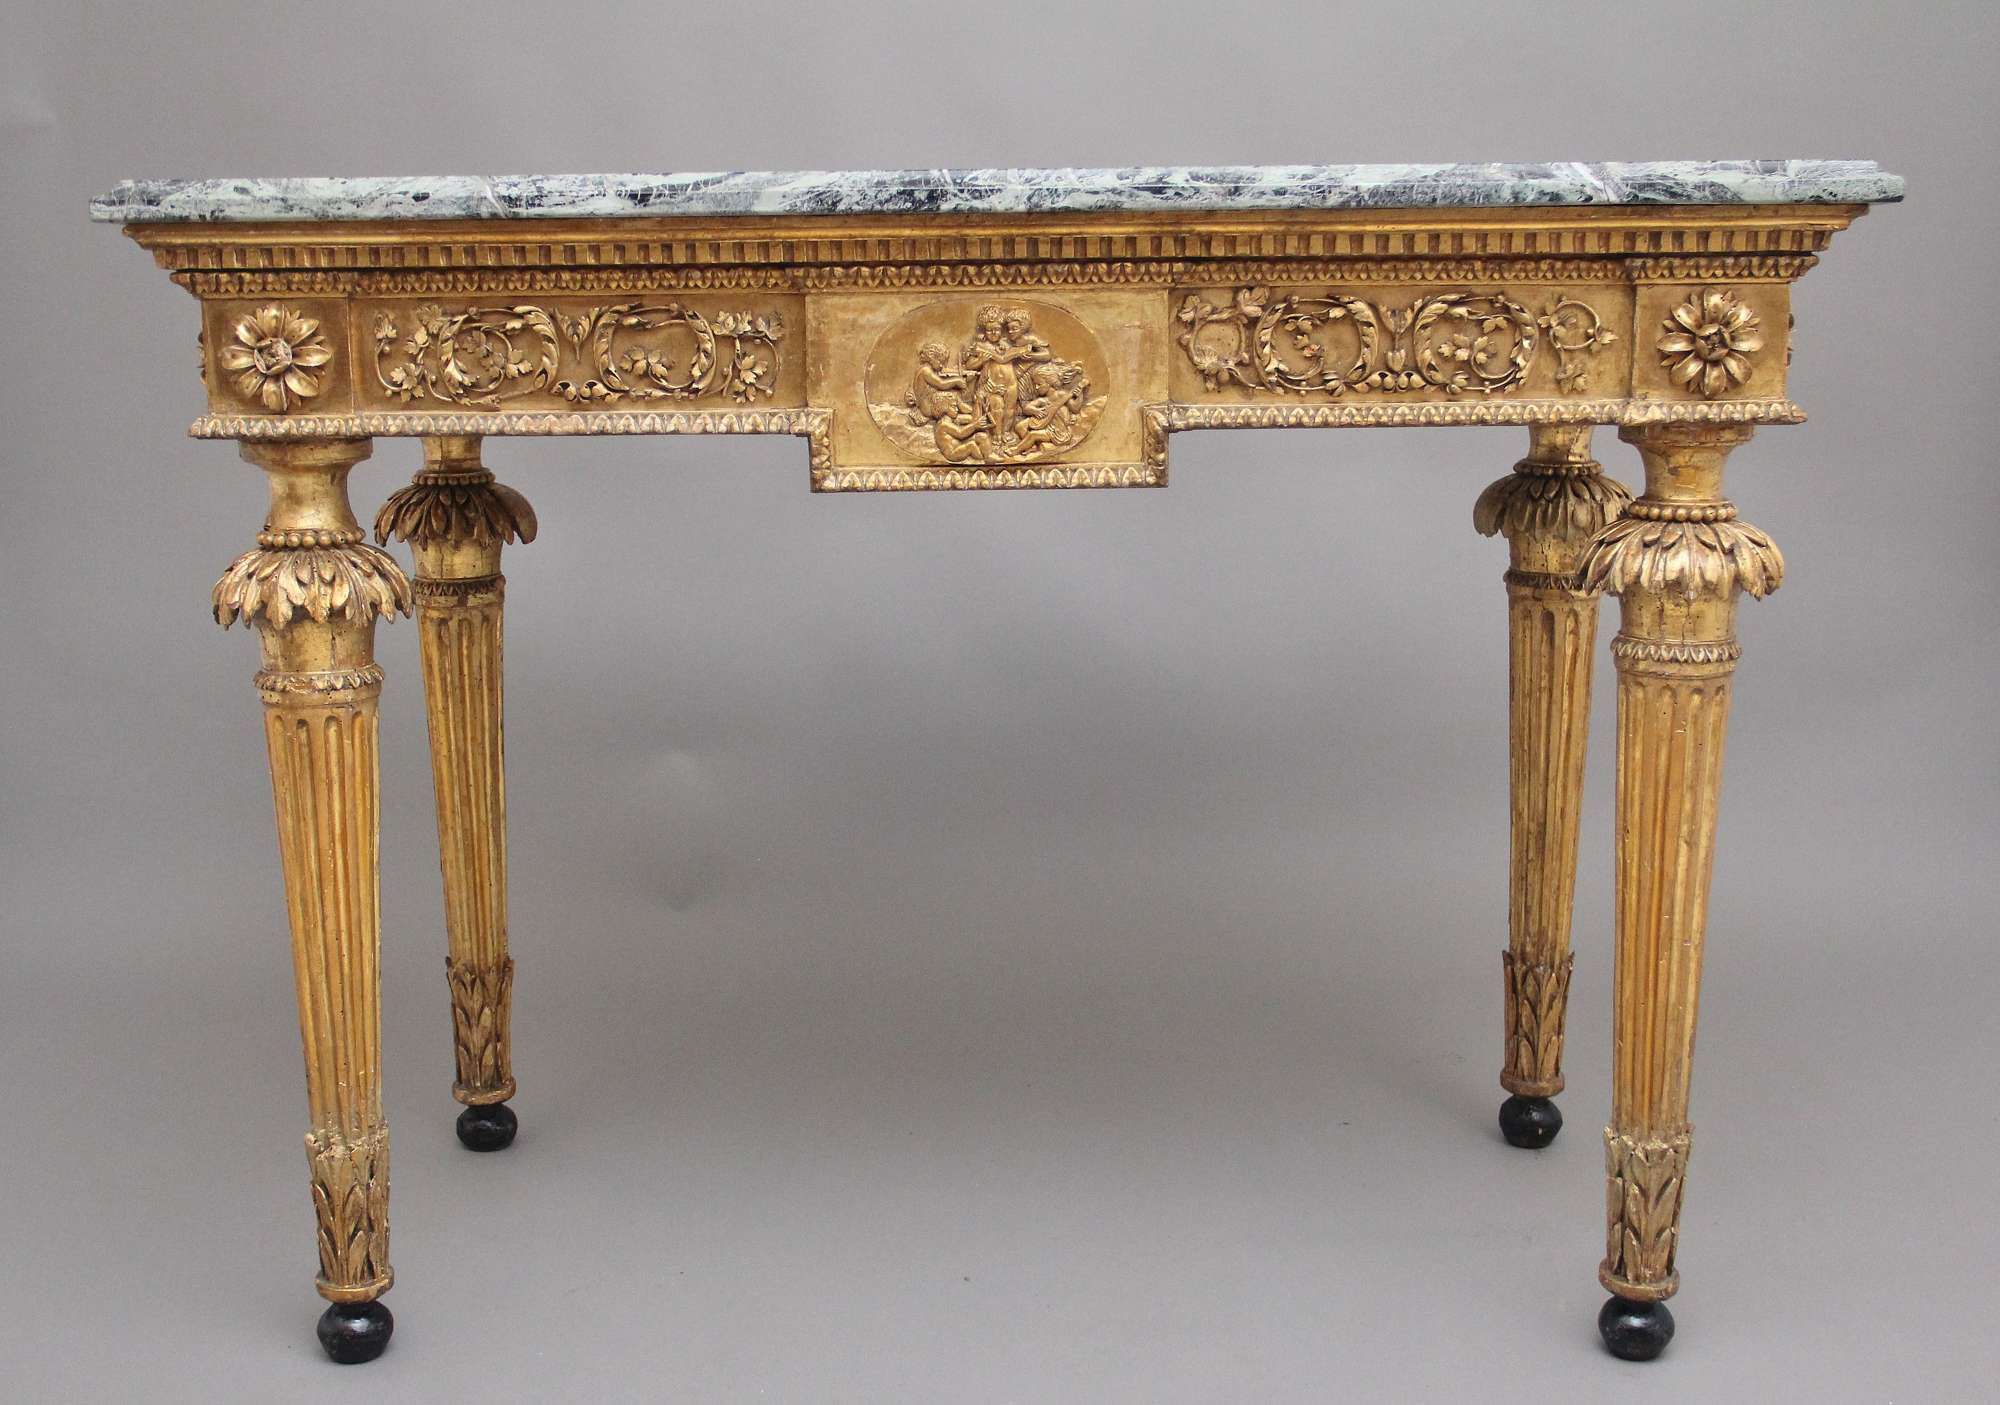 A Superb Quality 18th Century Italian Giltwood Antique Console Table